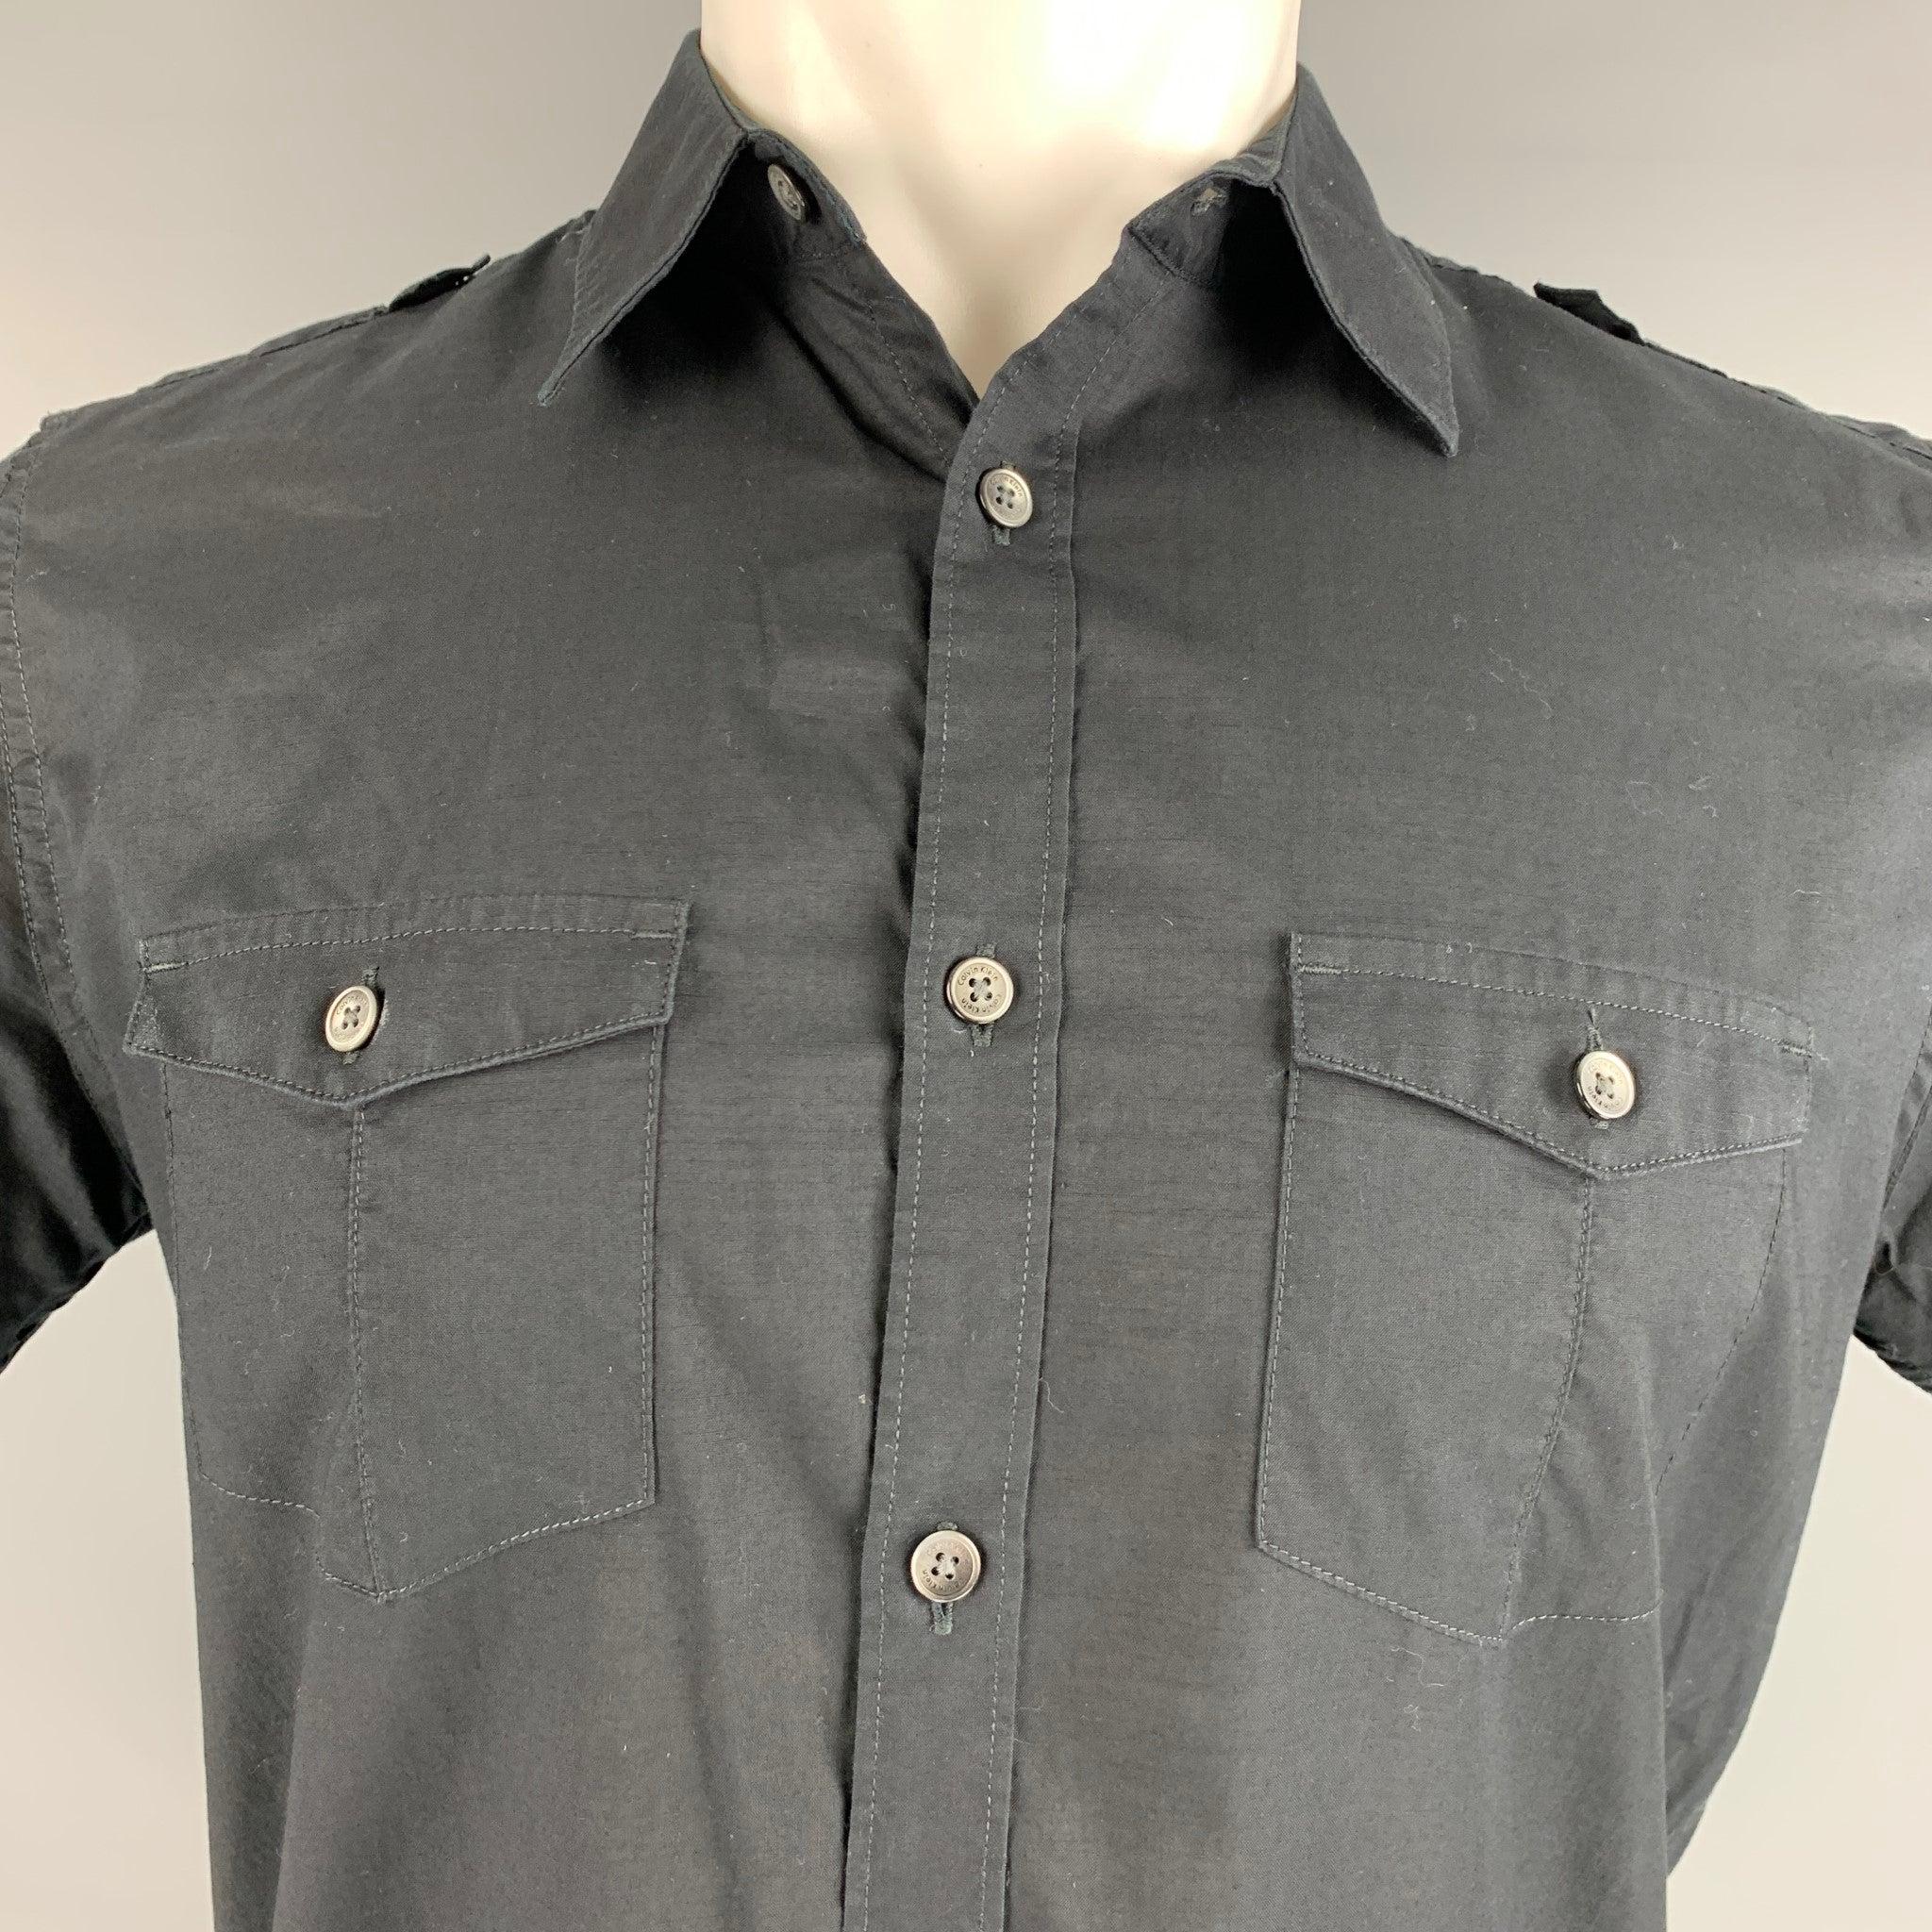 CALVIN KLEIN short sleeve
shirt in a black cotton fabric featuring short sleeves, epaulettes, two pockets,and a button up closure.Excellent Pre-Owned Condition. 

Marked:   S 

Measurements: 
 
Shoulder: 17 inches Chest: 40 inches Sleeve: 9 inches